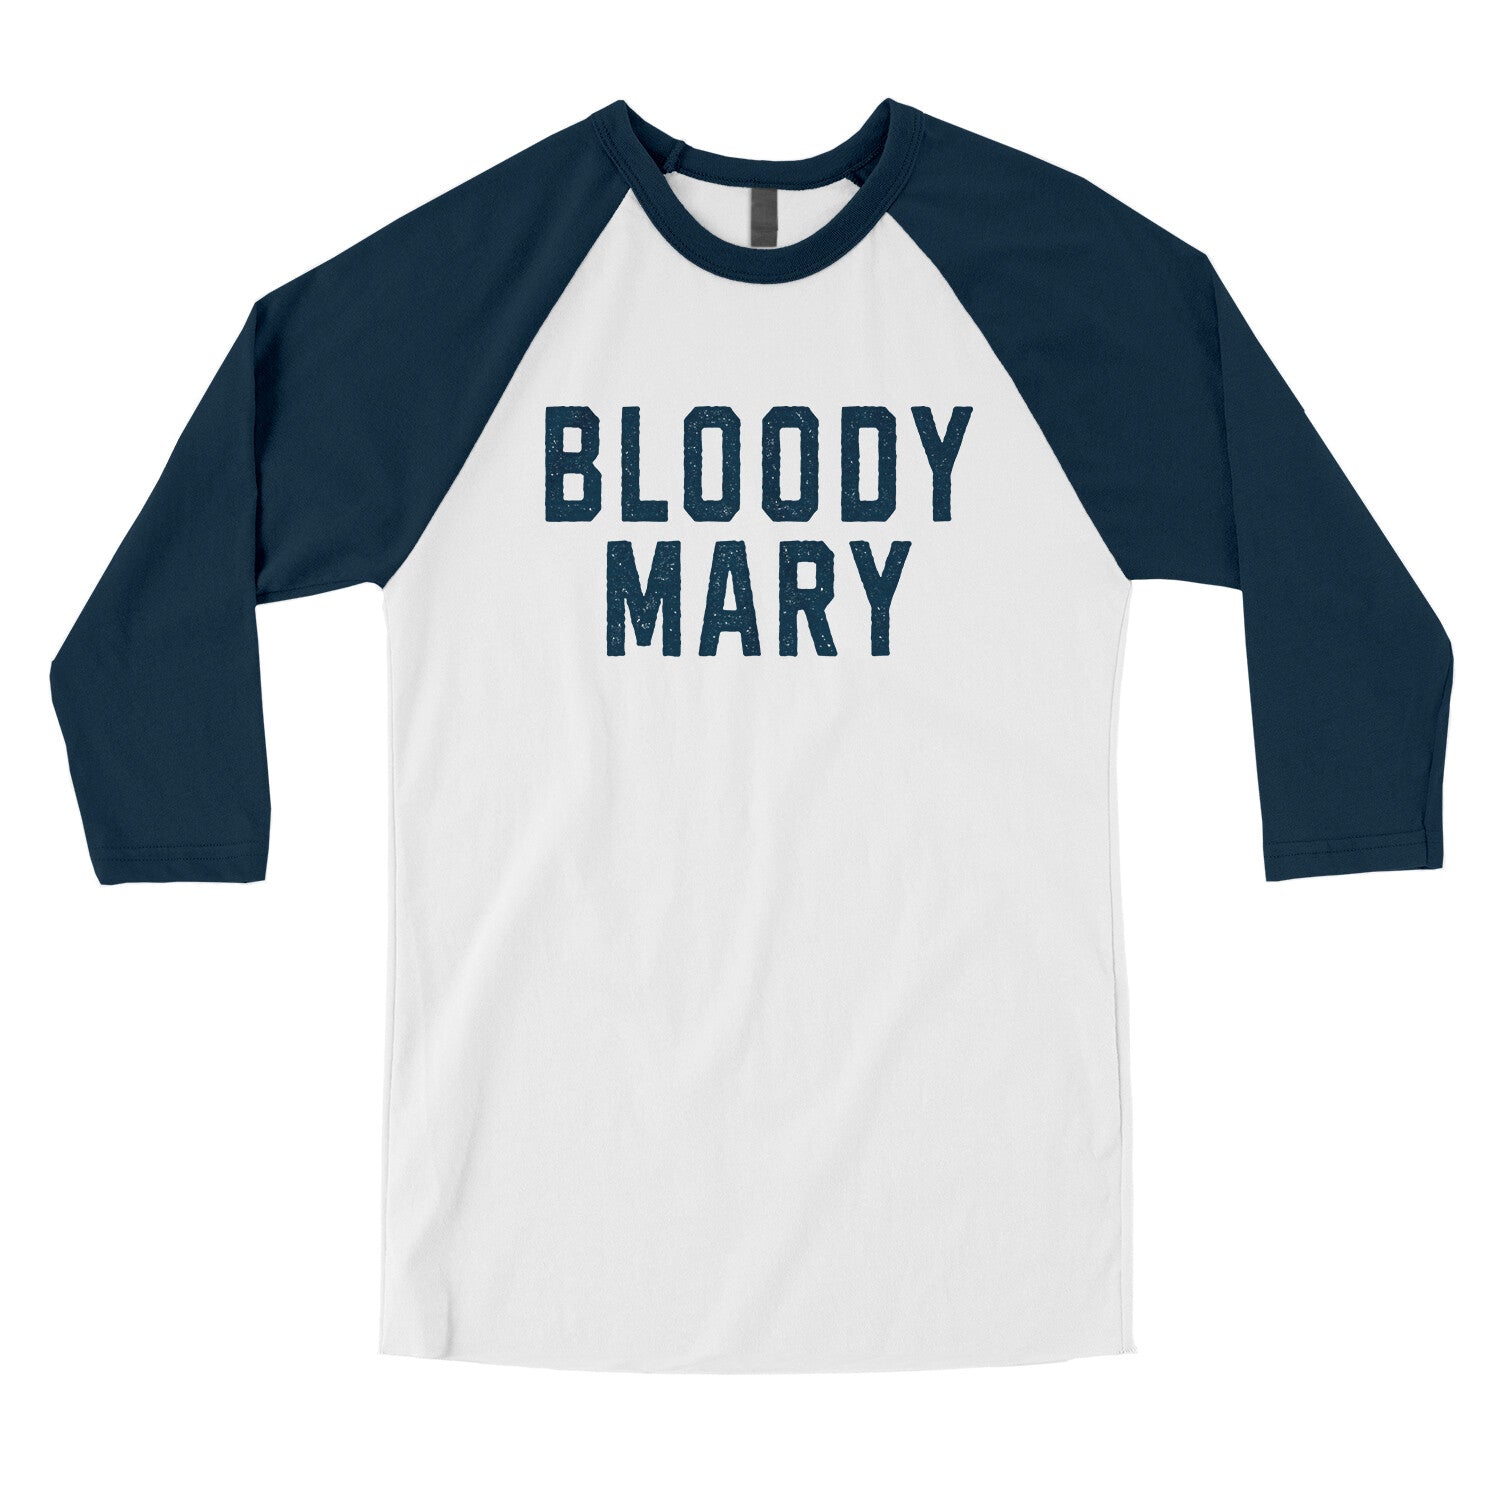 Bloody Mary in White with Navy Color